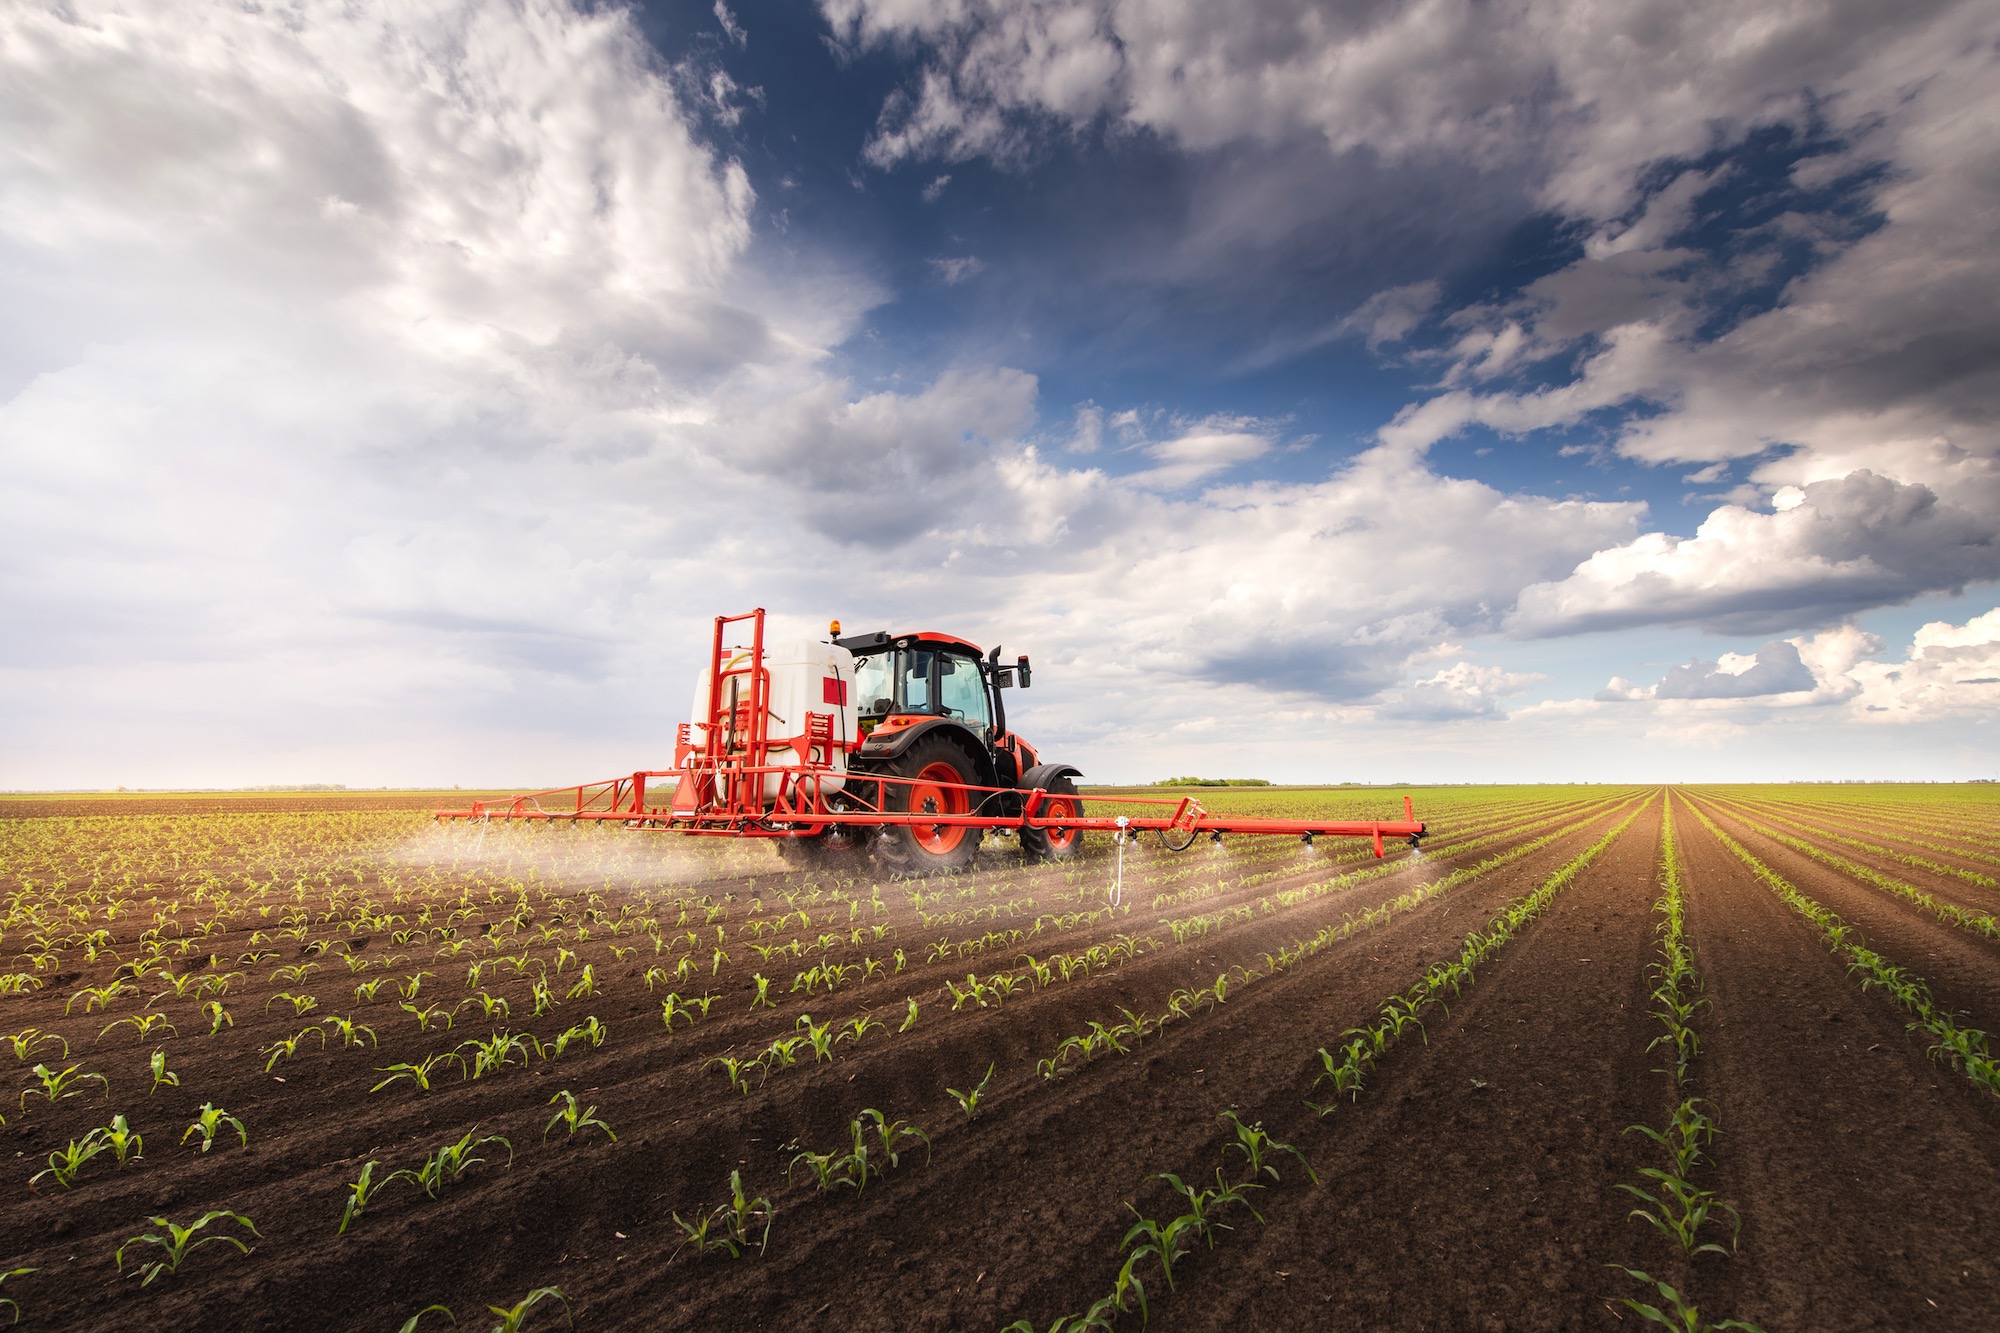 Crop spraying using agricultural equipment